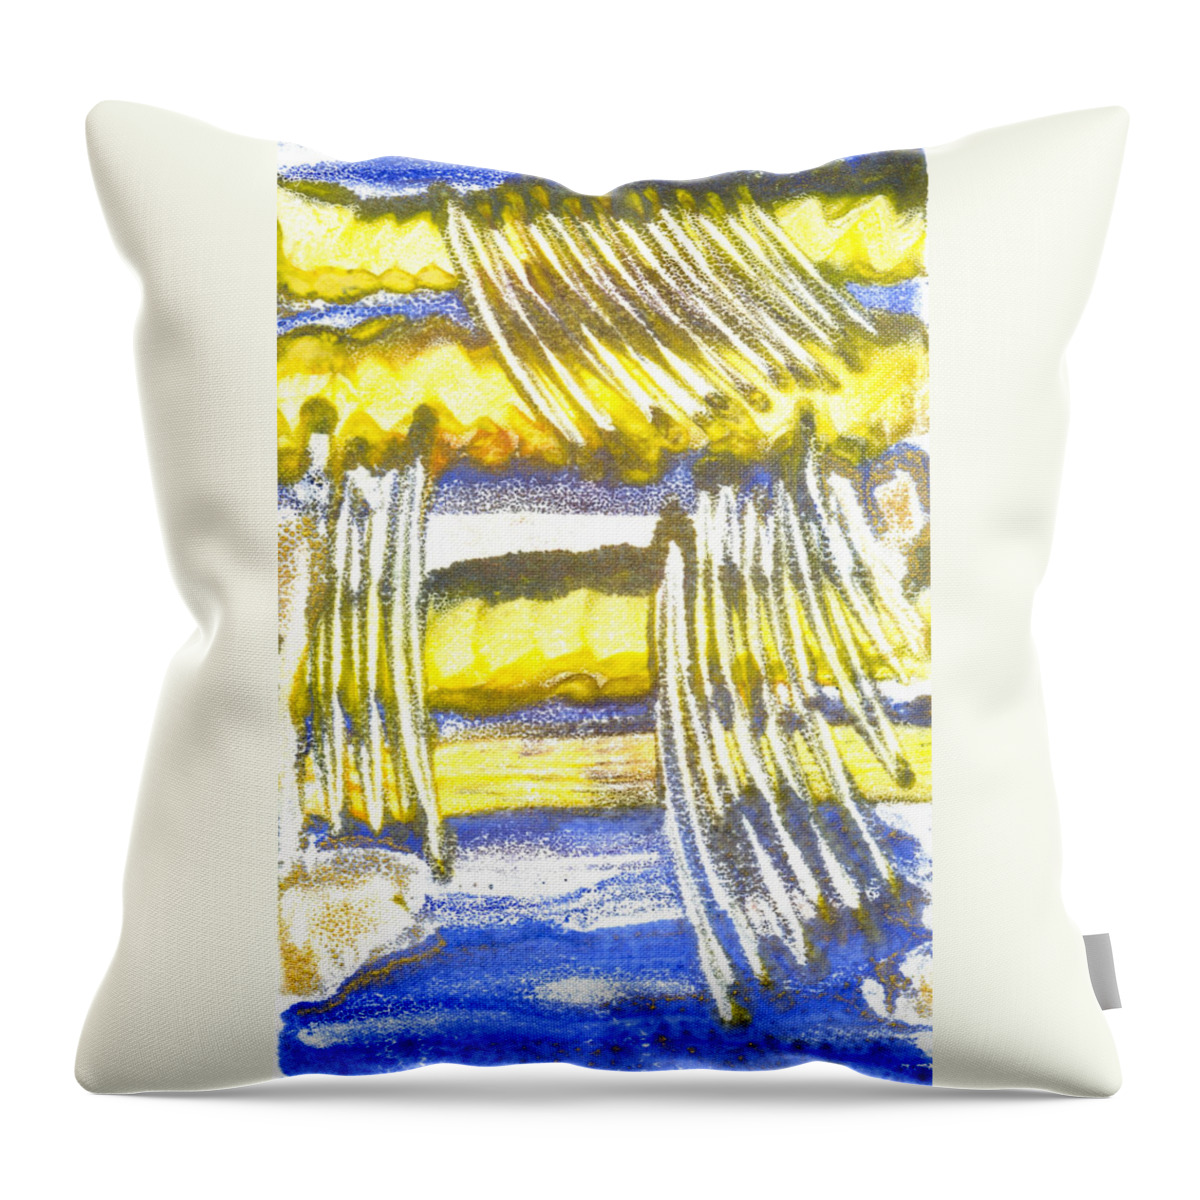 Blue Yellow Gold Abstract Expressionist Process Throw Pillow featuring the painting Beyond by Heather Hennick